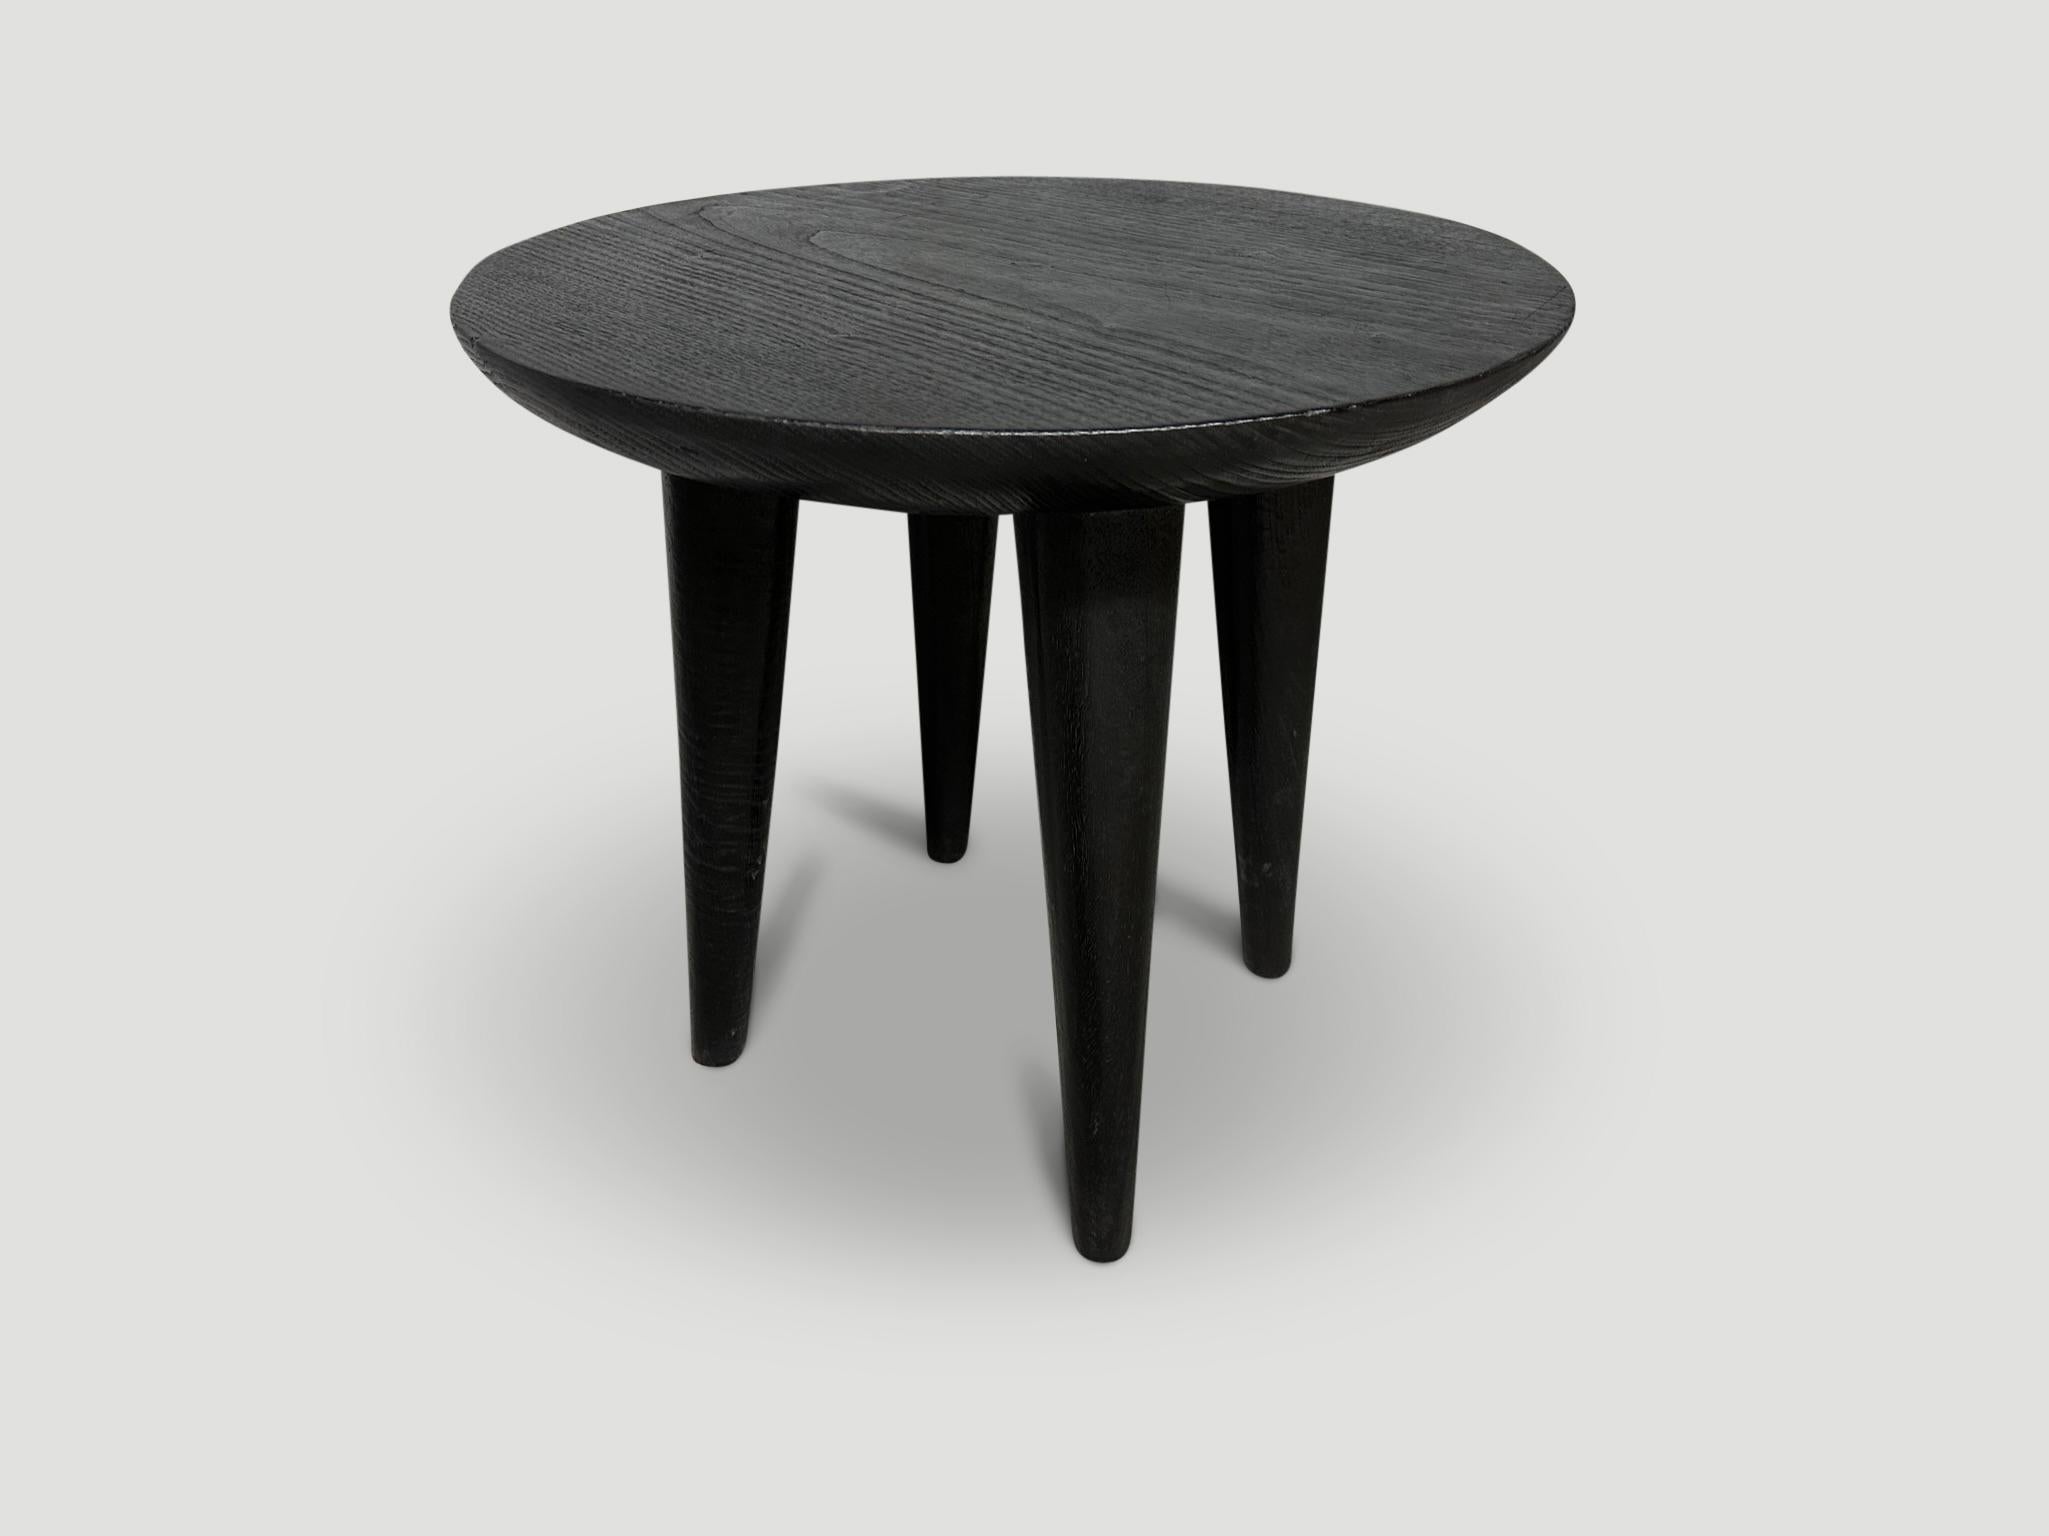 Minimalist side table with a three inch single slab, bevelled top resting on cone style legs. Charred, sanded and sealed revealing the beautiful wood grain. It’s all in the details.

The Triple Burnt Collection represents a unique line of modern